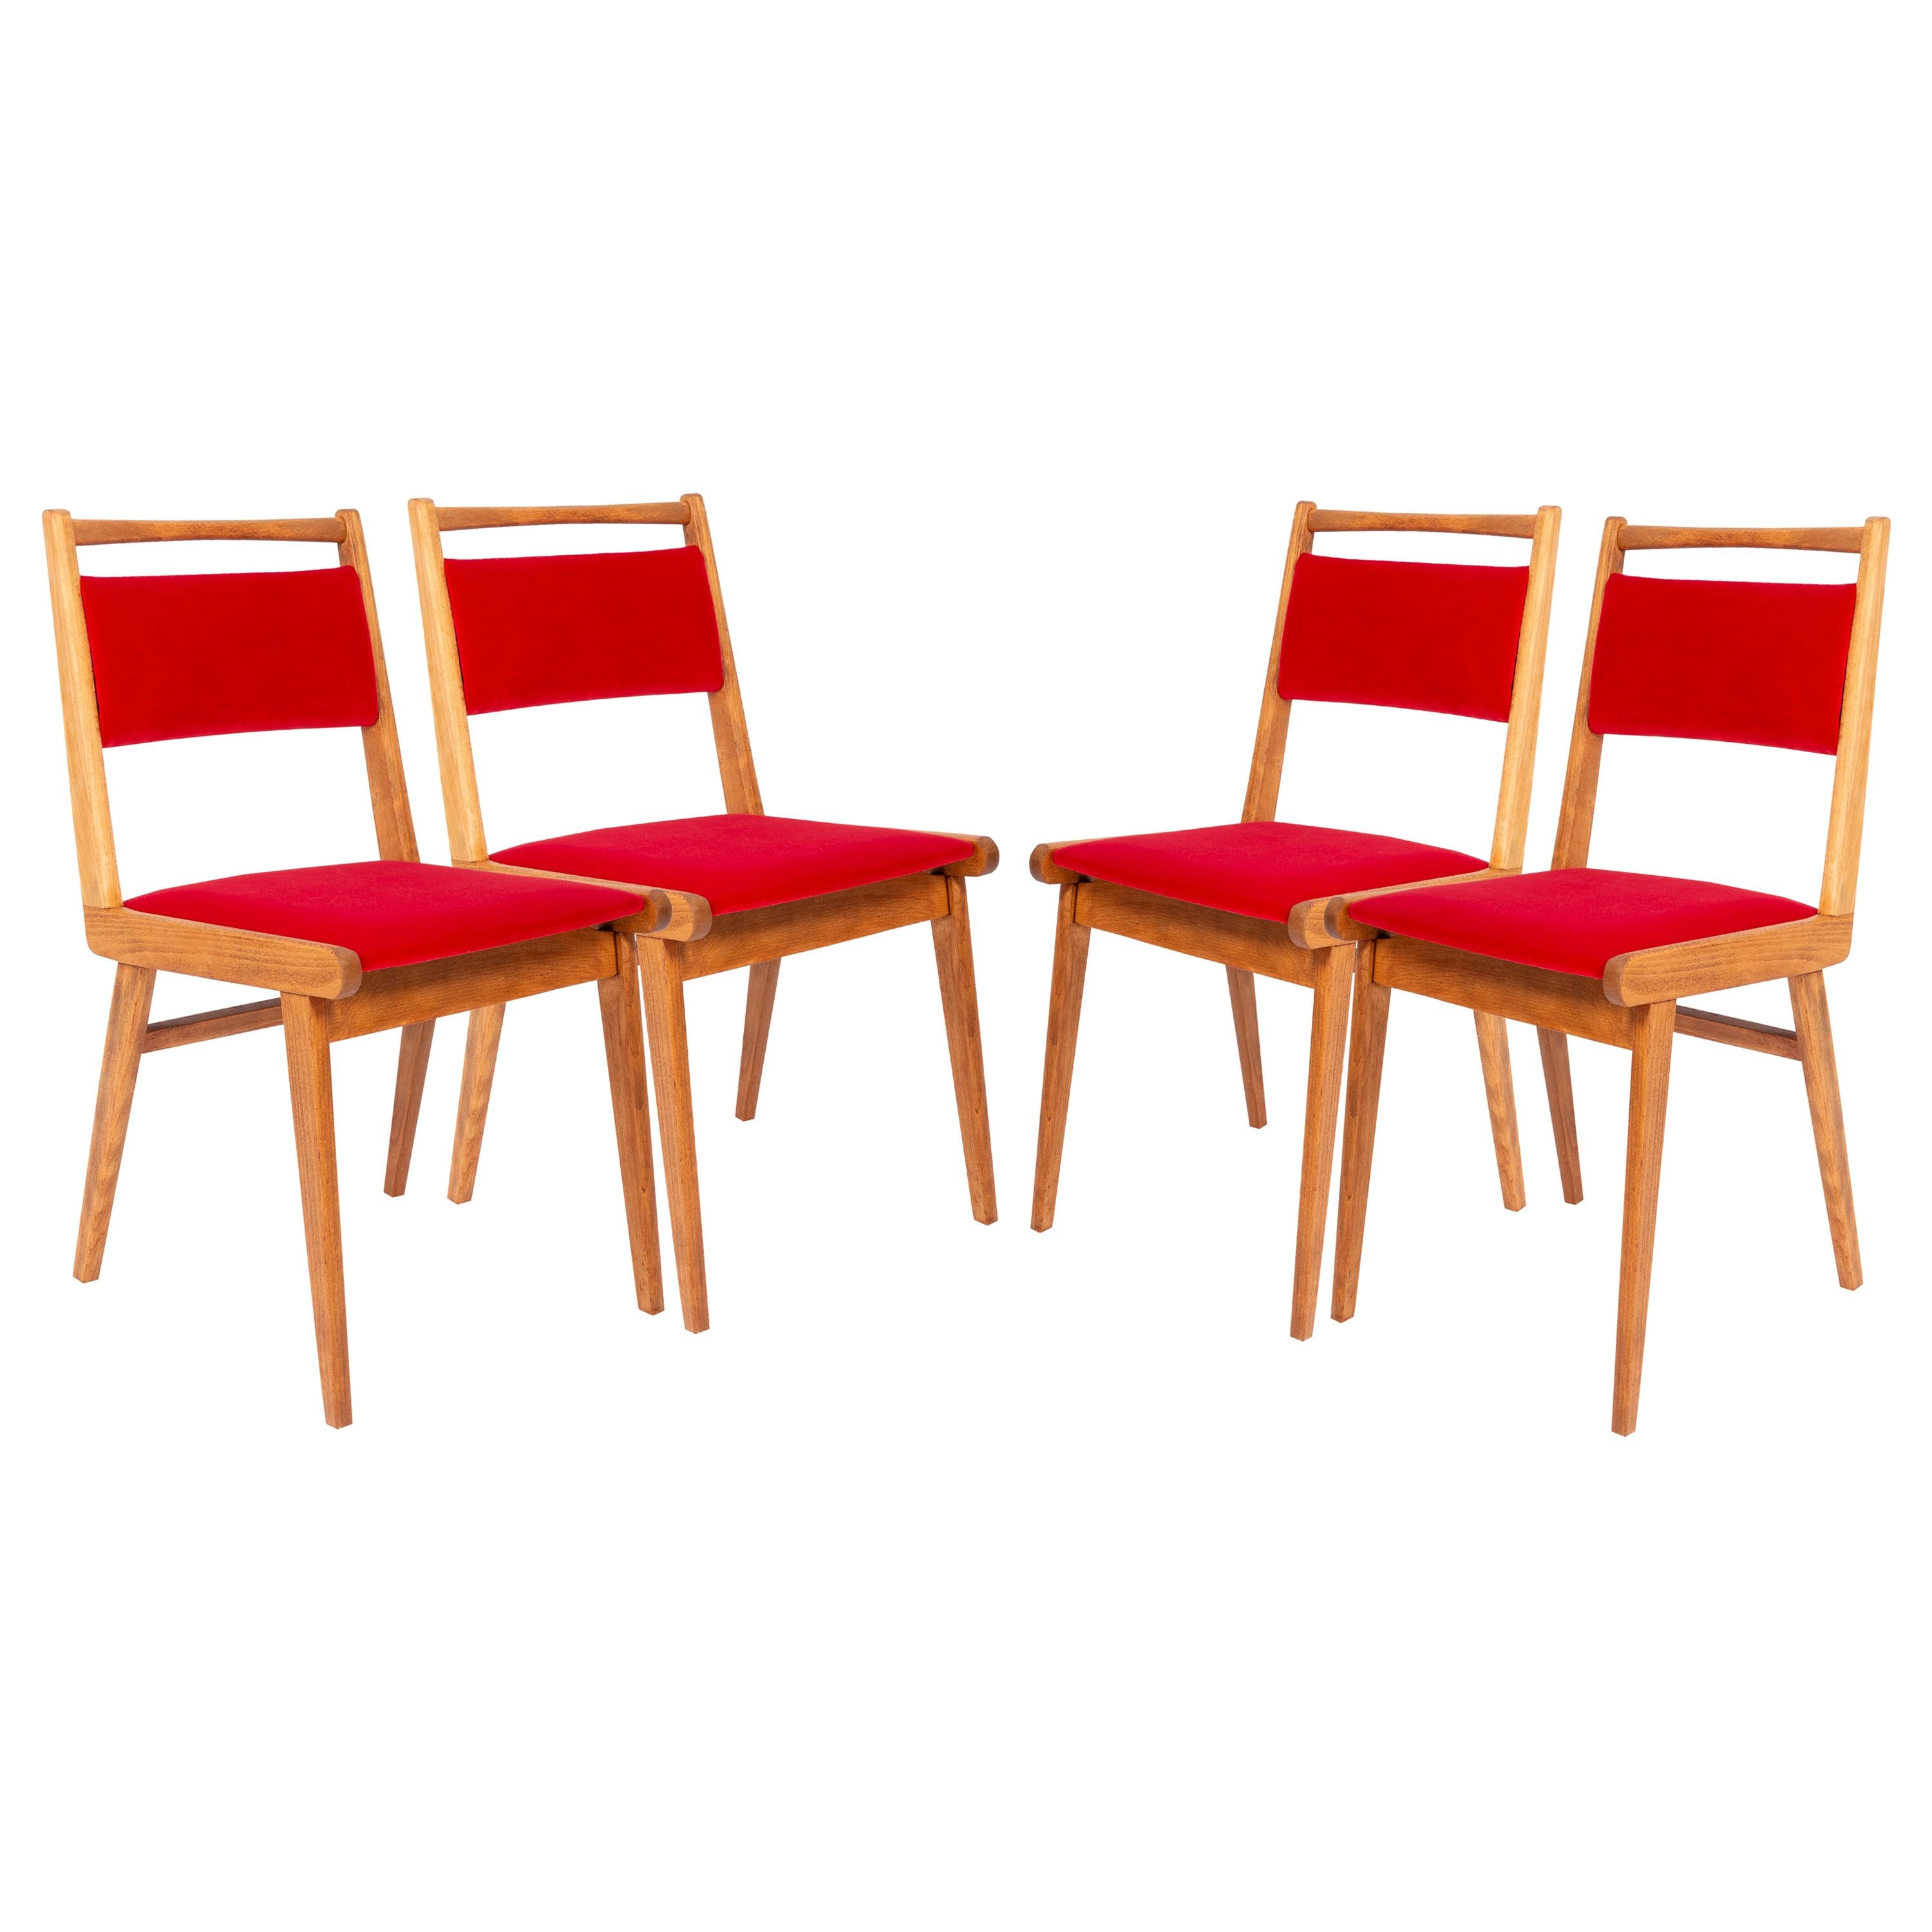 Set of Four 20th Century Red Velvet Chairs, by Rajmund Halas, Poland, 1960s For Sale